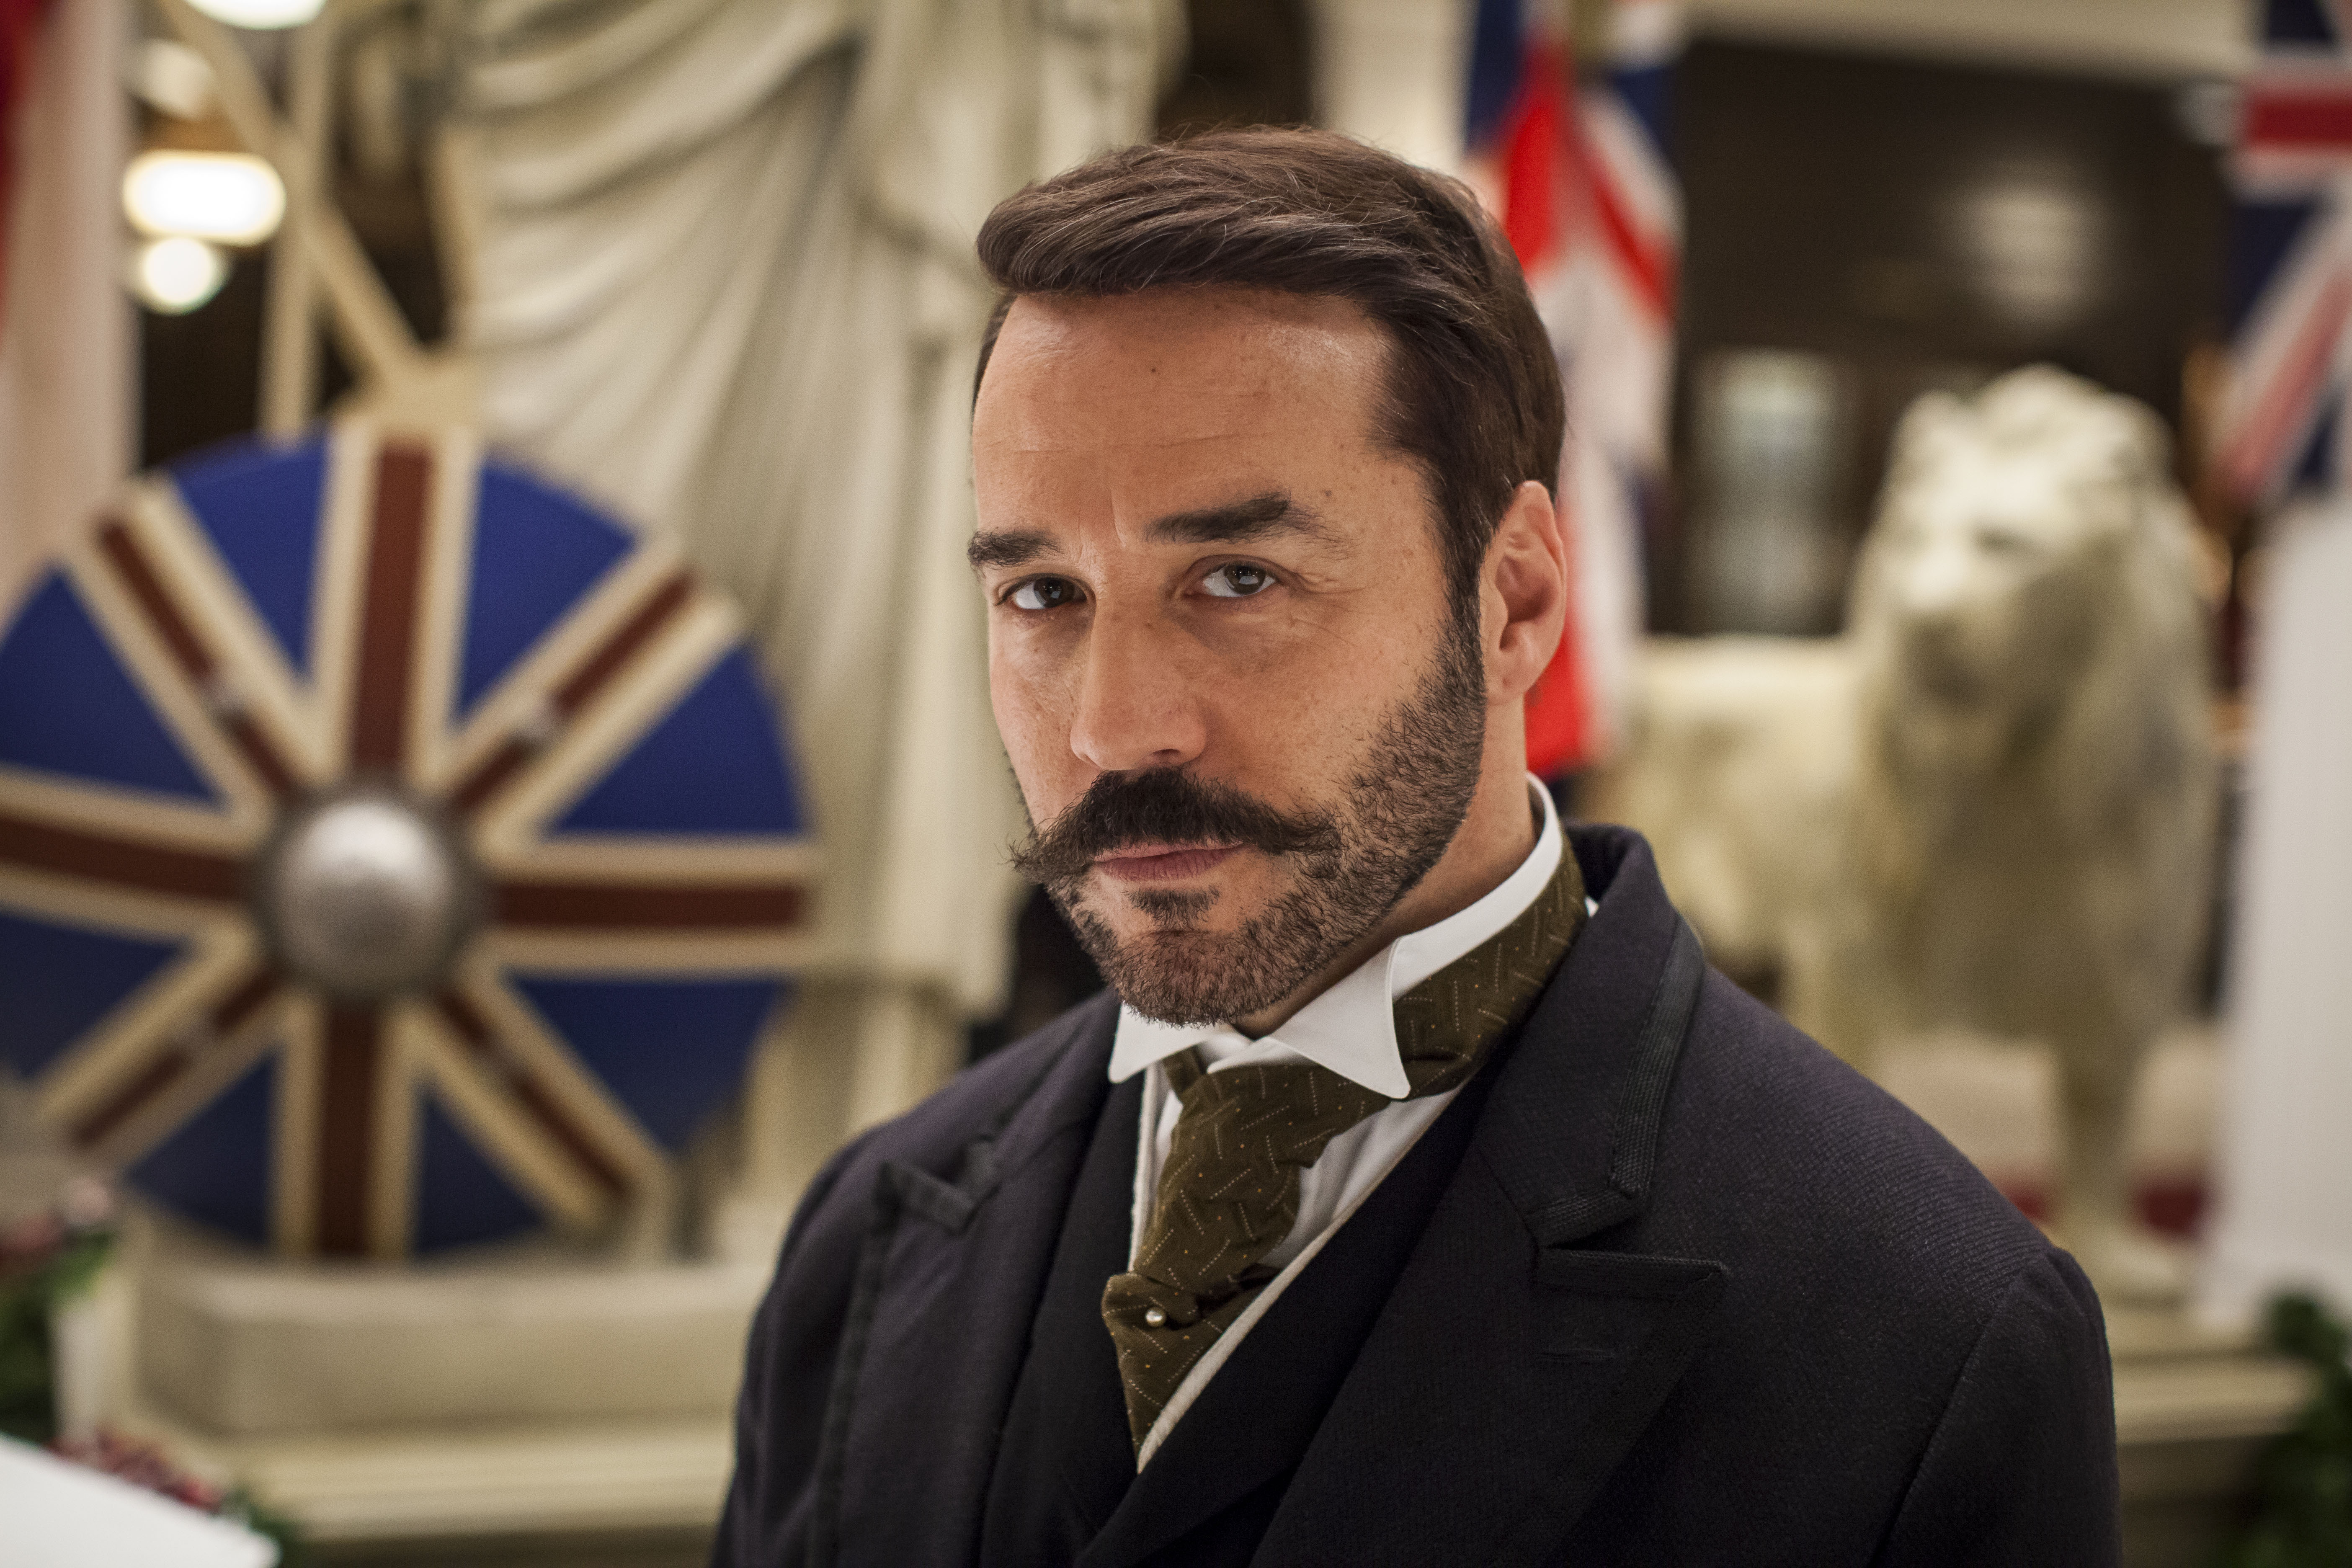 Jeremy Piven will be sticking around the store for a while. (Photo: ITV for Masterpiece)